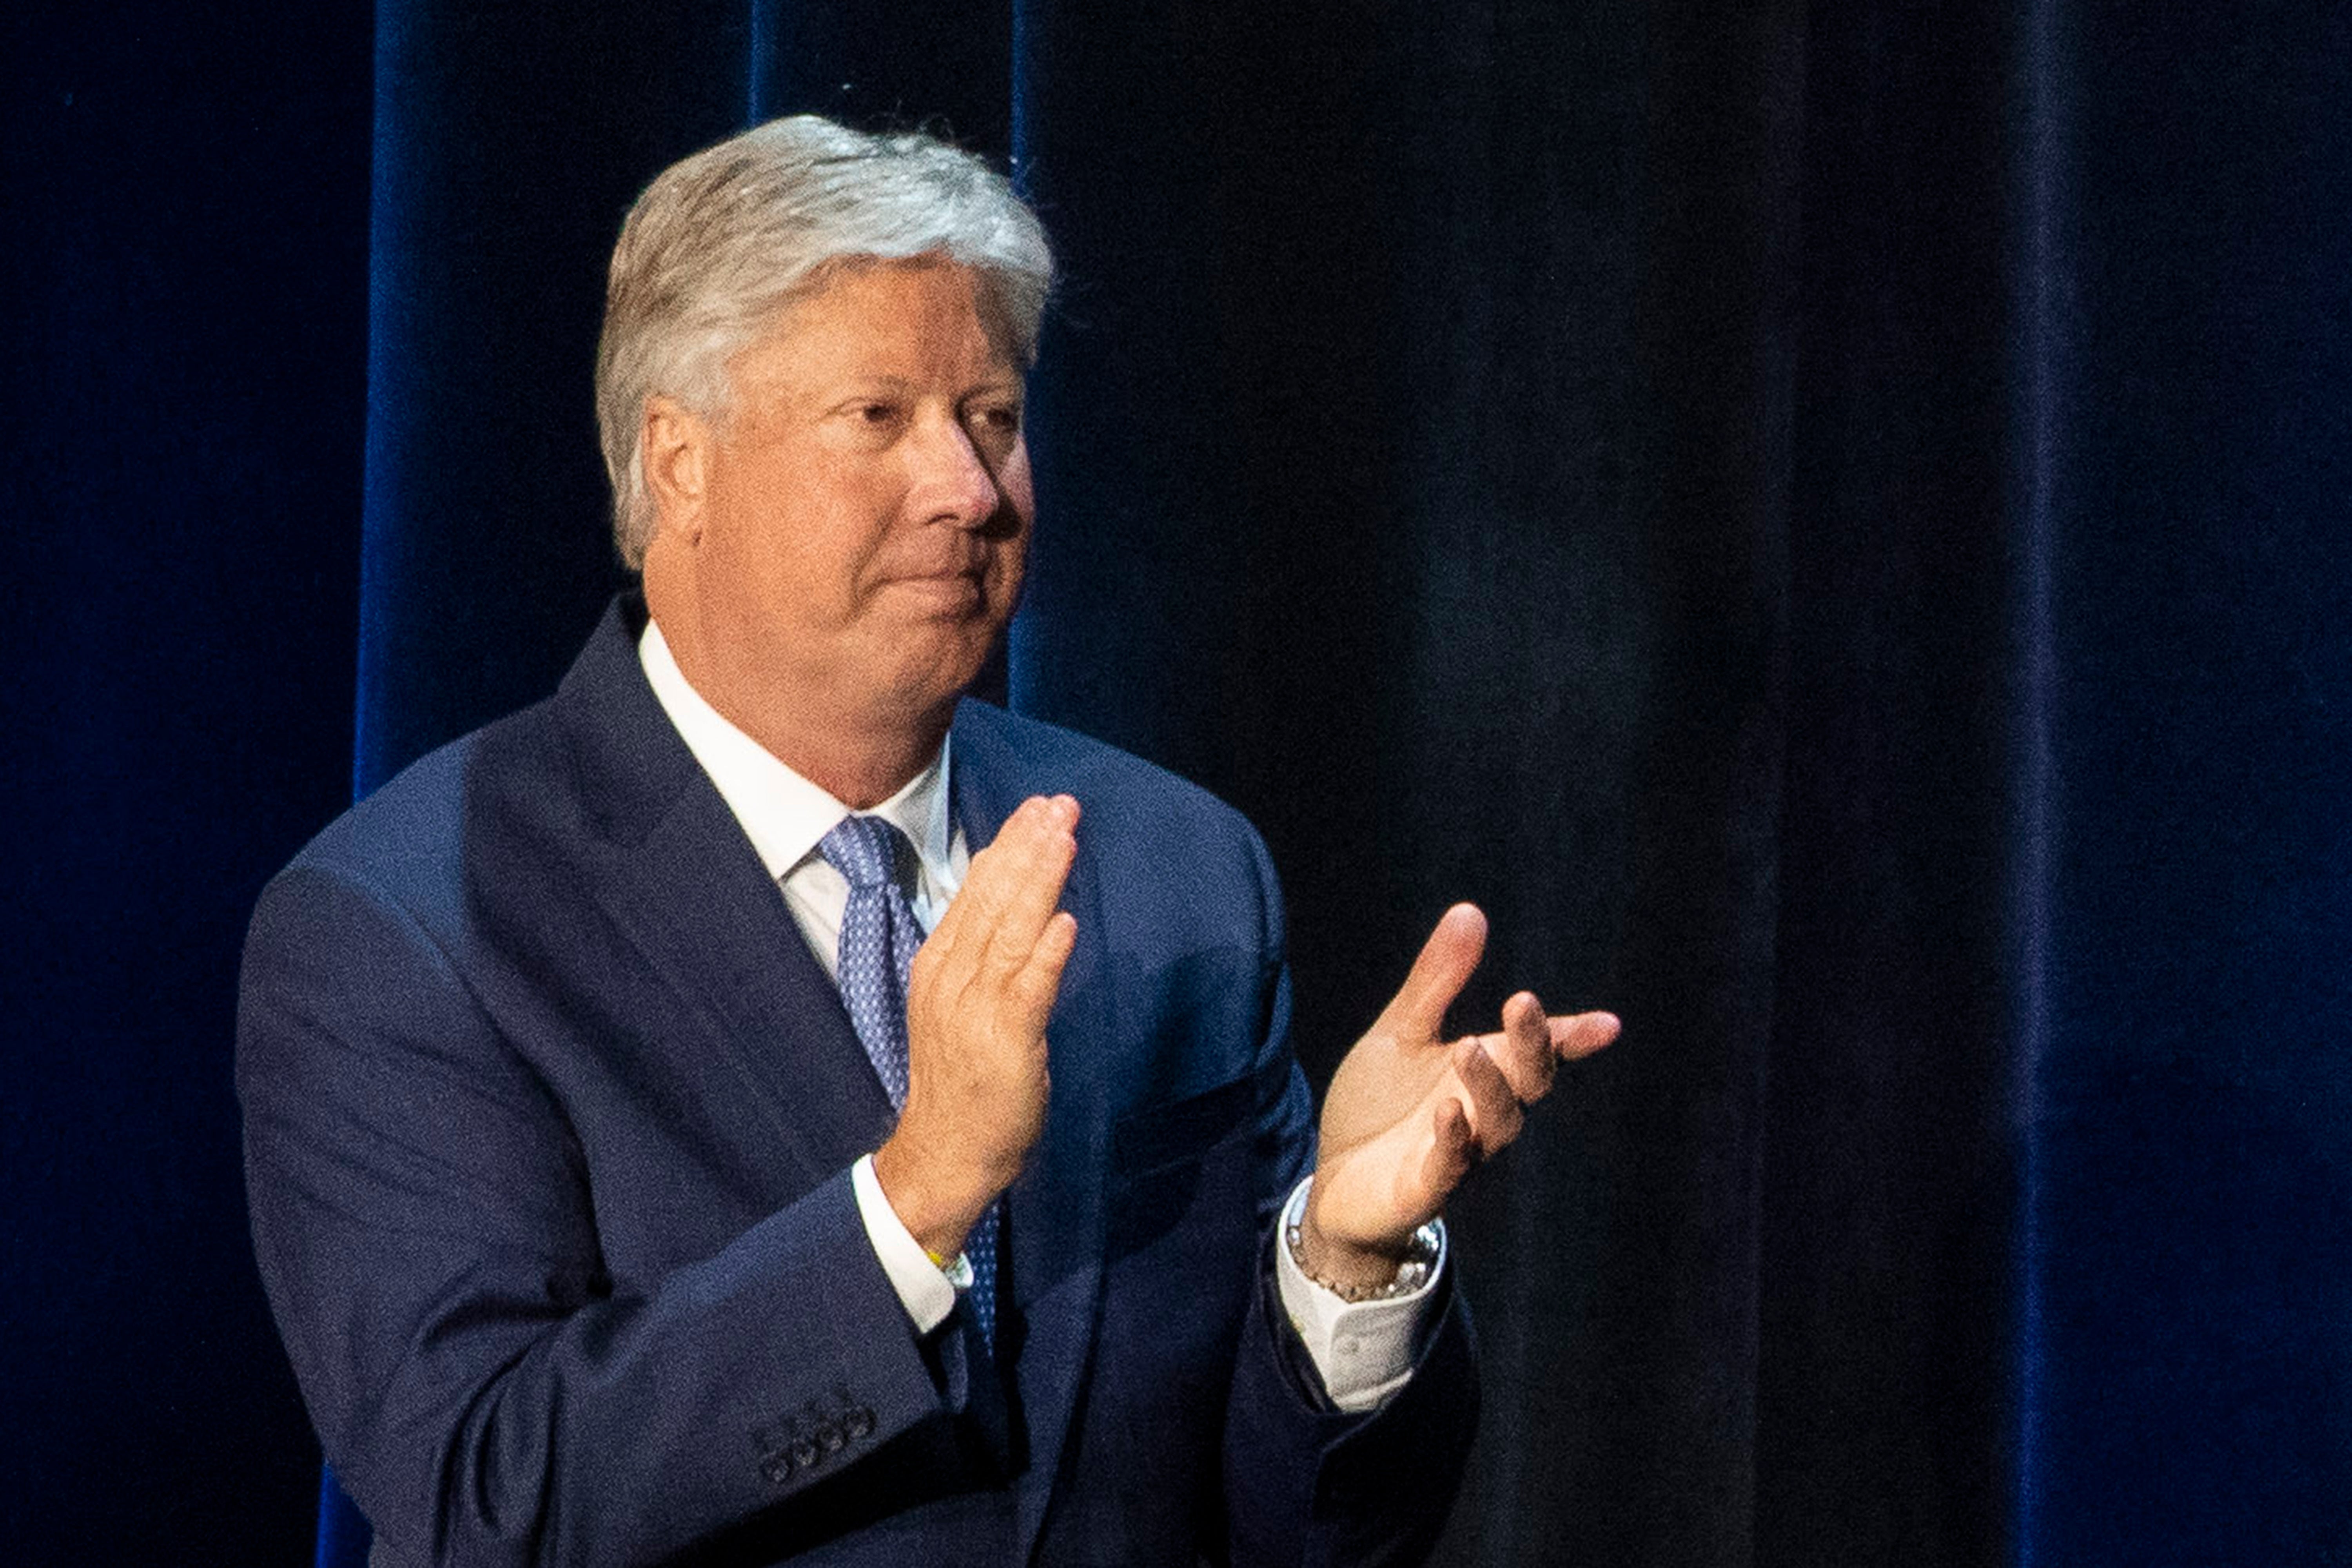 Gateway Church’s board of elders said in a statement, released onTuesday, that they’d accepted senior pastor Robert Morris’ resignation